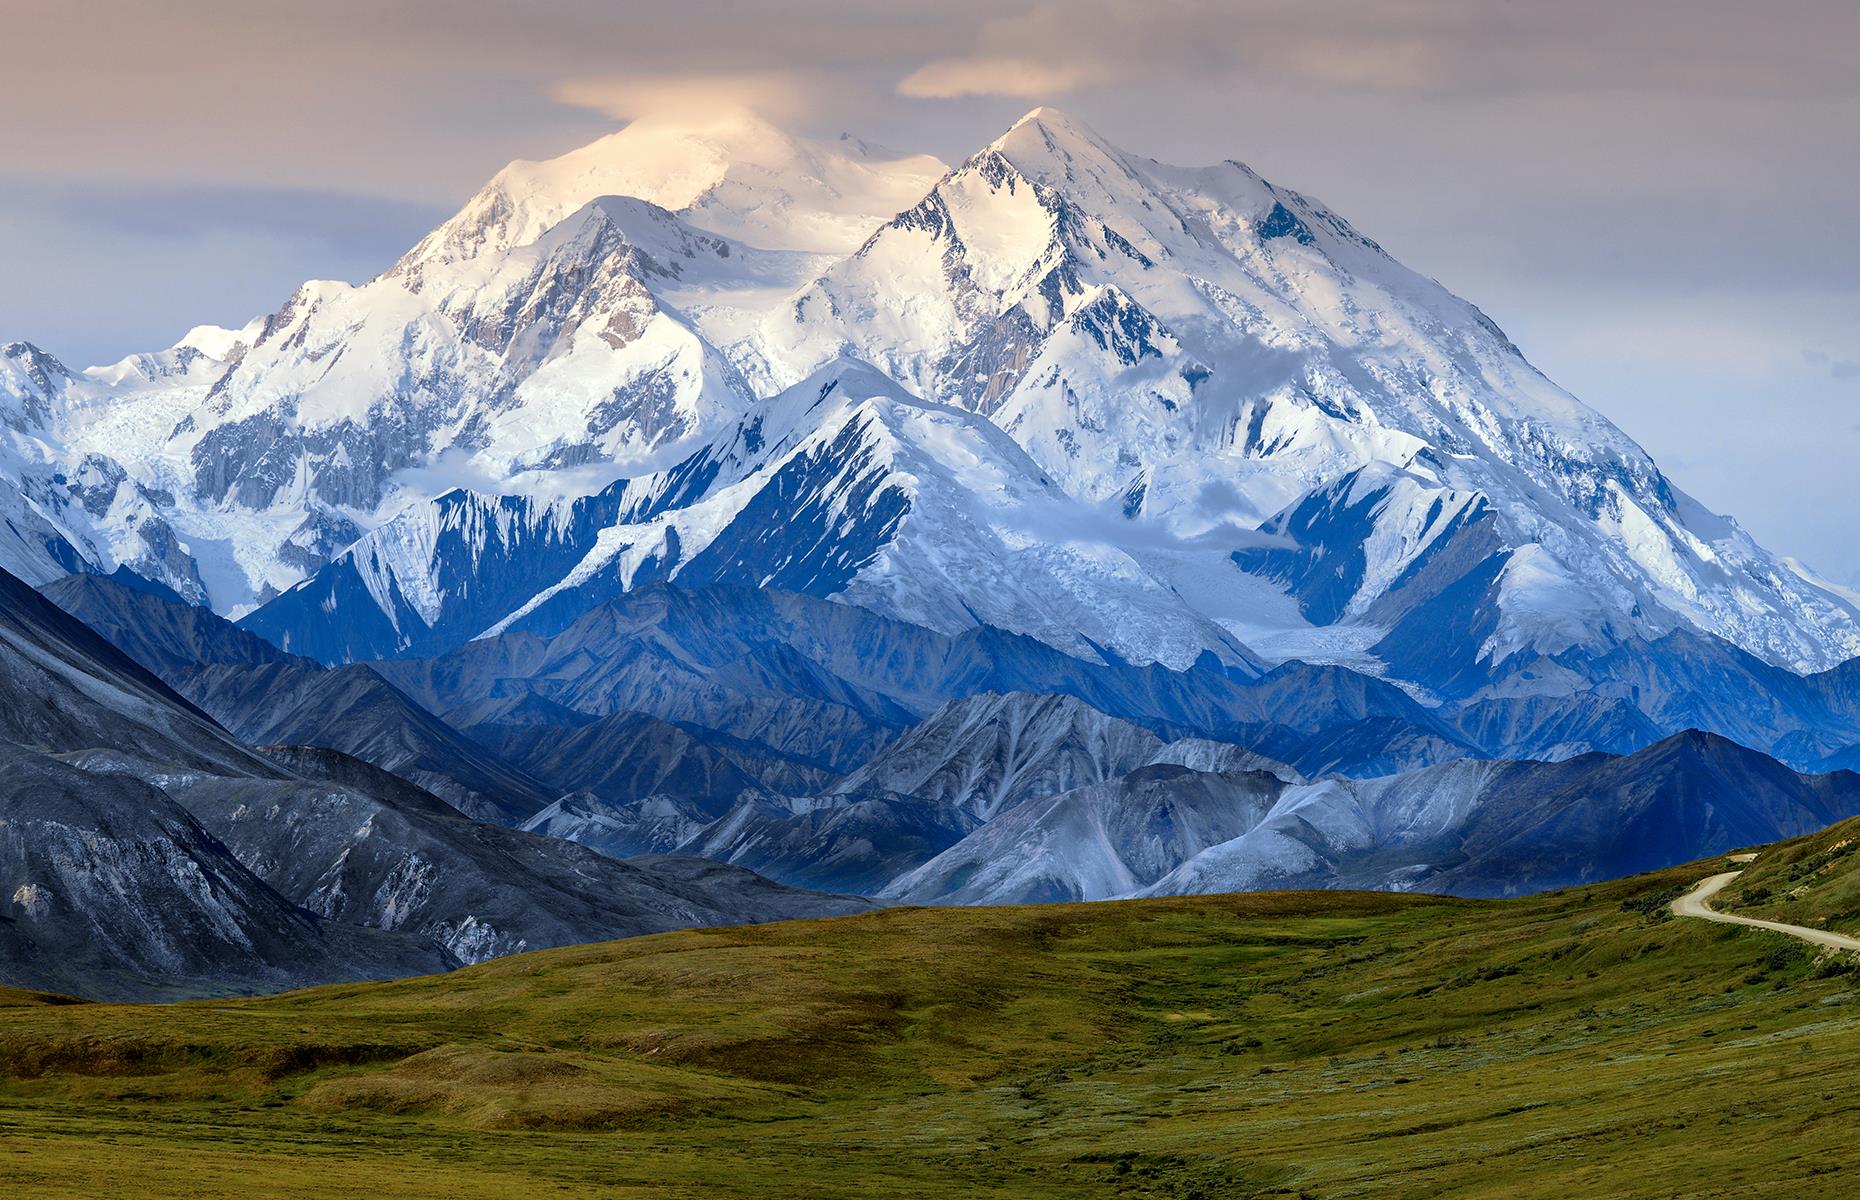 <p>Formerly named Mount McKinley National Park after US president William McKinley, the National Park Service changed the park's name to Denali in 2015, on the eve of its 100th anniversary, to acknowledge its original, native name. Denali is an Athabaskan word meaning "the tall one", referring to Mount Denali (also formerly Mount McKinley), which towers an impressive 20,310 feet (6,190m) above sea level.</p>  <p><strong><a href="https://www.loveexploring.com/galleries/107668/historic-photos-of-americas-national-parks">Historic photos of America's national parks</a></strong></p>